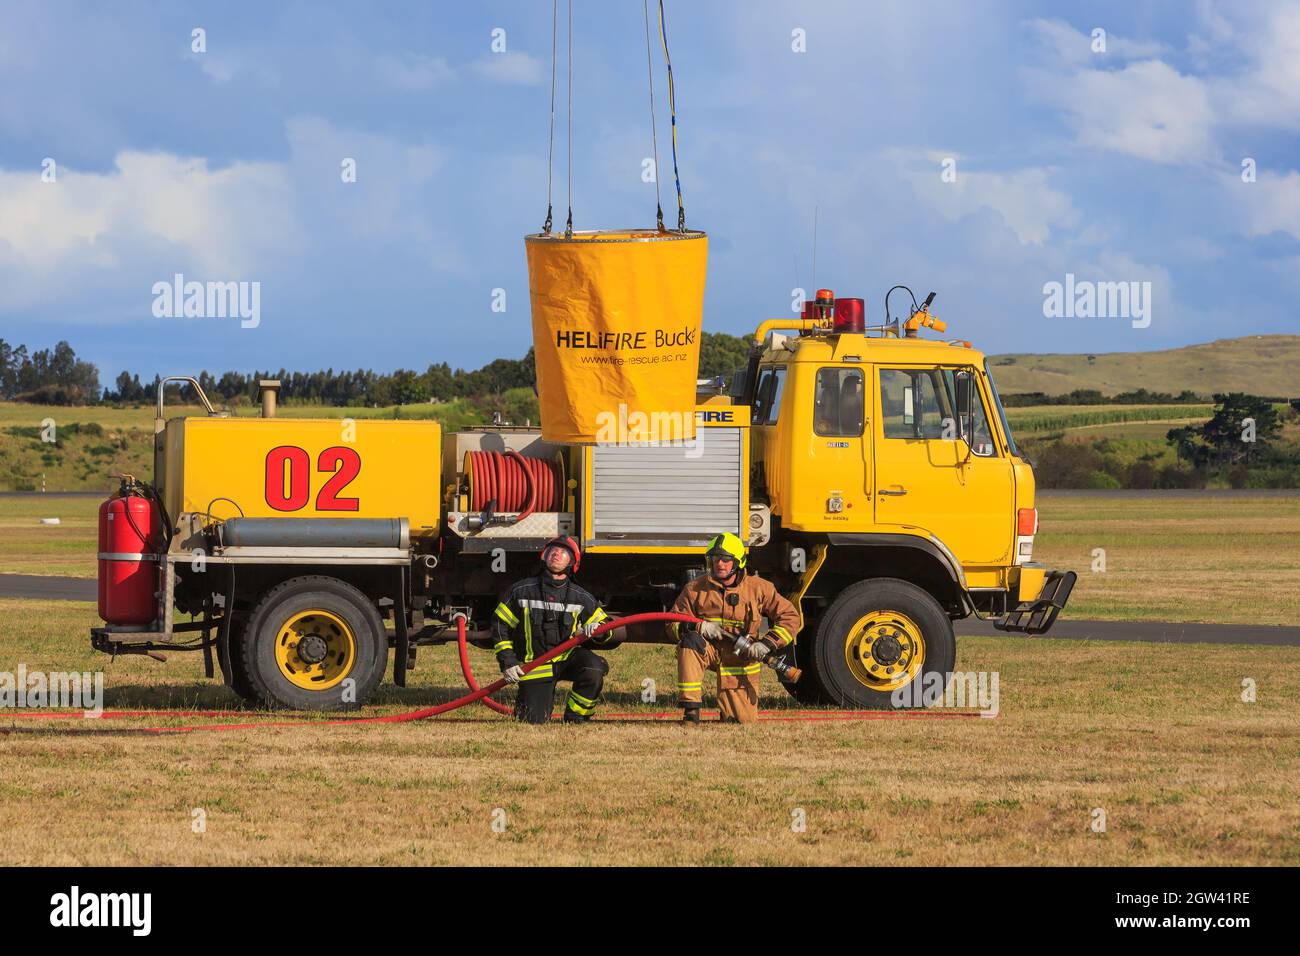 A fire truck at an airport. A monsoon bucket is being lowered by a helicopter for the firefighters to fill Stock Photo